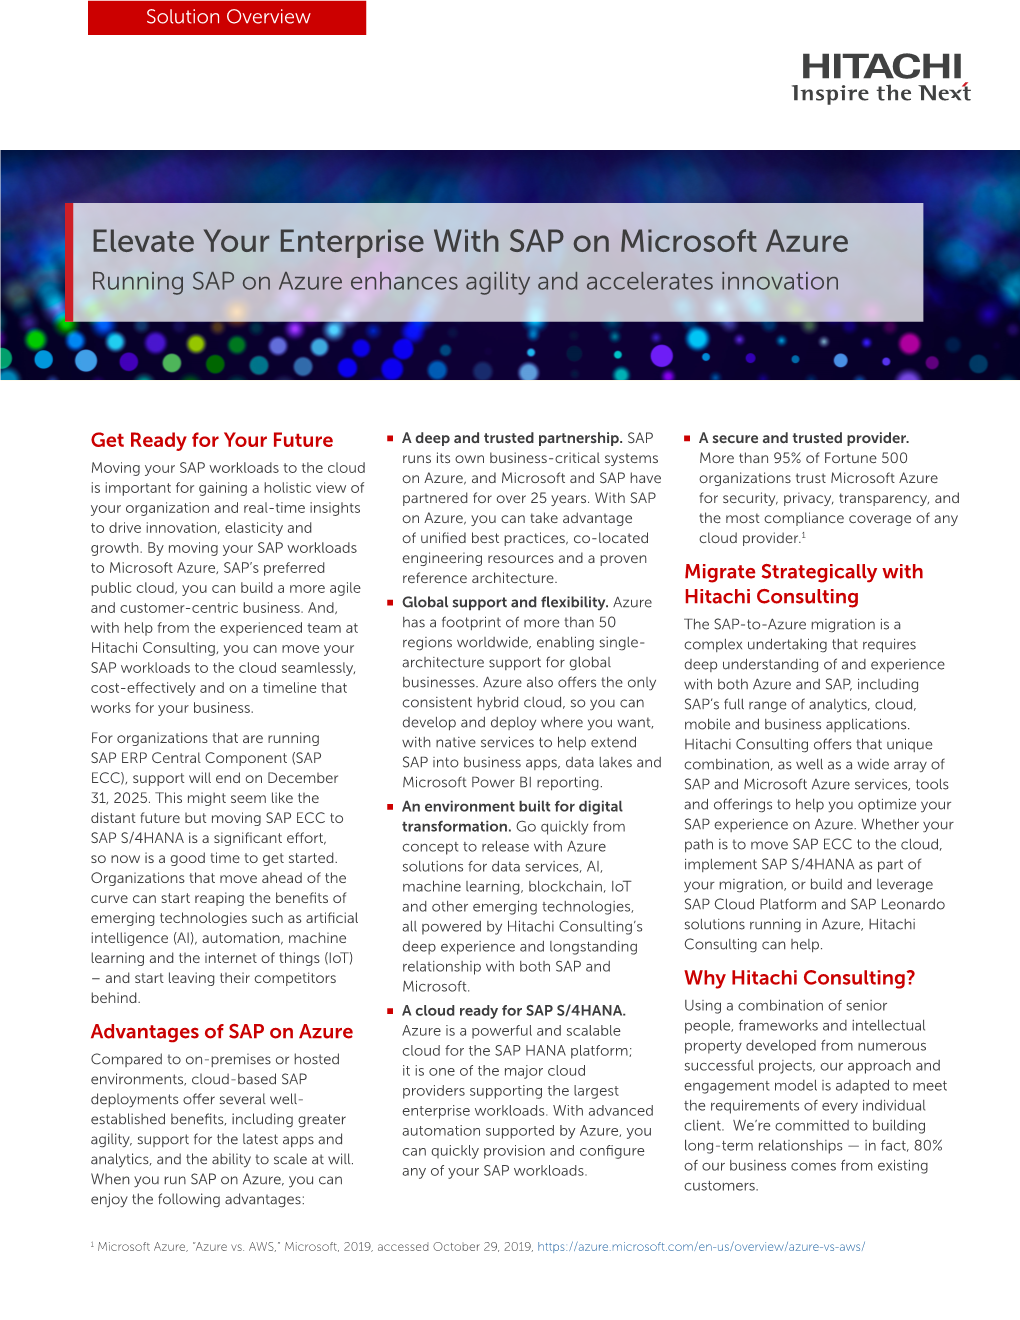 Elevate Your Enterprise with SAP on Microsoft Azure Running SAP on Azure Enhances Agility and Accelerates Innovation